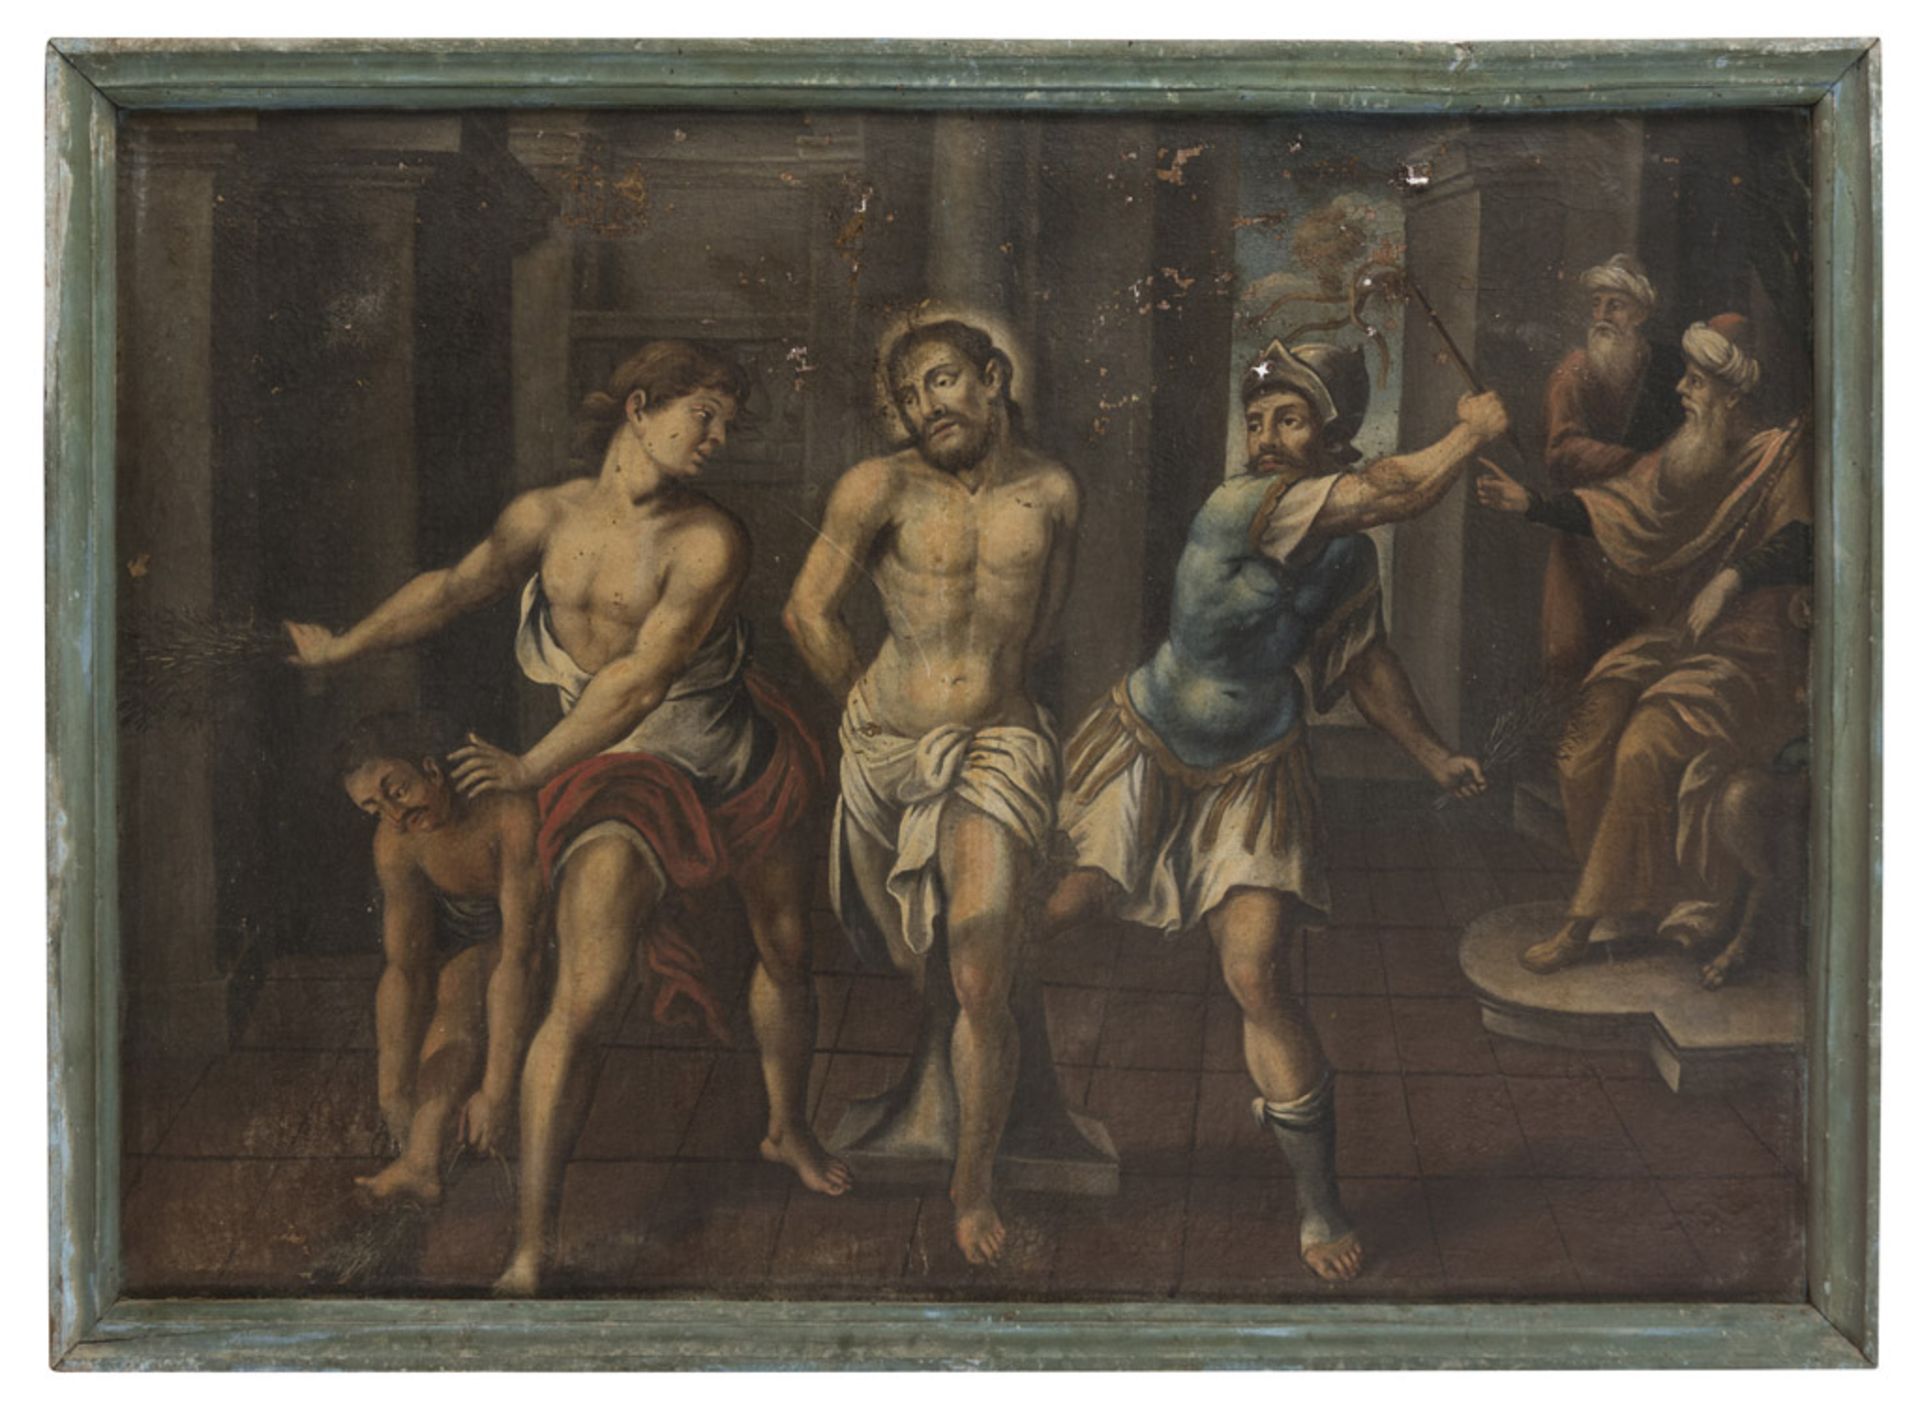 LATE MANNERIST TUSCAN ROMAN PAINTER CHRIST WITH CROWN OF THORNS FLAGELLATION CHRIST AND VERONICA - Image 3 of 3